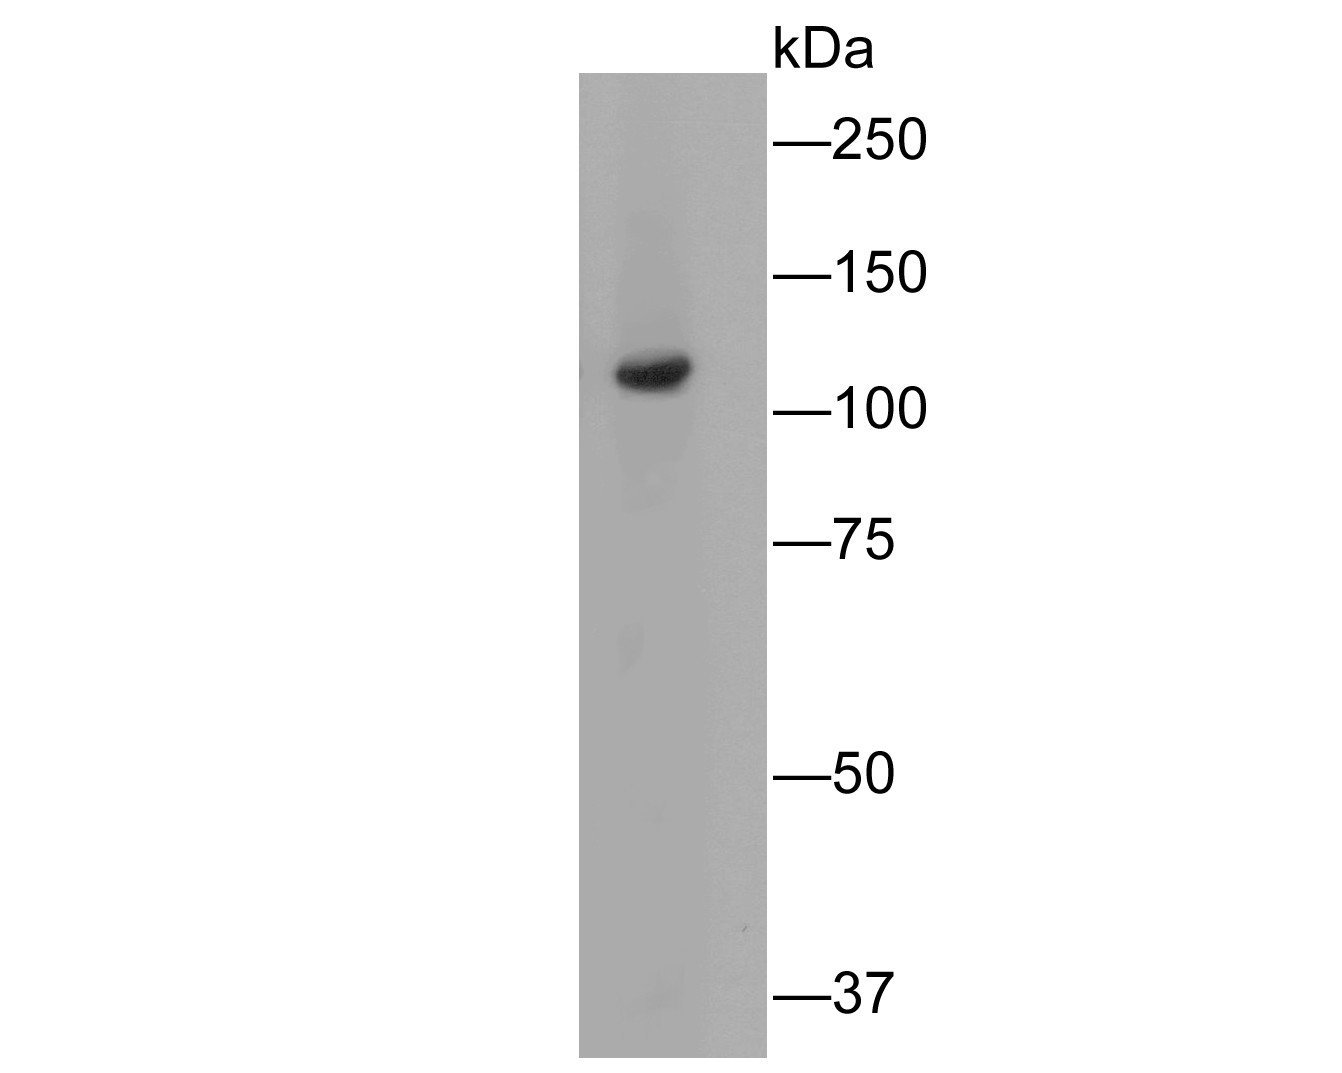 Western blot analysis of Butyrylcholine esterase on human skin tissue lysates. Proteins were transferred to a PVDF membrane and blocked with 5% BSA in PBS for 1 hour at room temperature. The primary antibody (HA500248, 1/1,000) was used in 5% BSA at room temperature for 2 hours. Goat Anti-Rabbit IgG - HRP Secondary Antibody (HA1001) at 1:5,000 dilution was used for 1 hour at room temperature.<br />
<br />
Predicted band size: 68 kDa<br />
Observed band size: 110 kDa (Glycosylation)